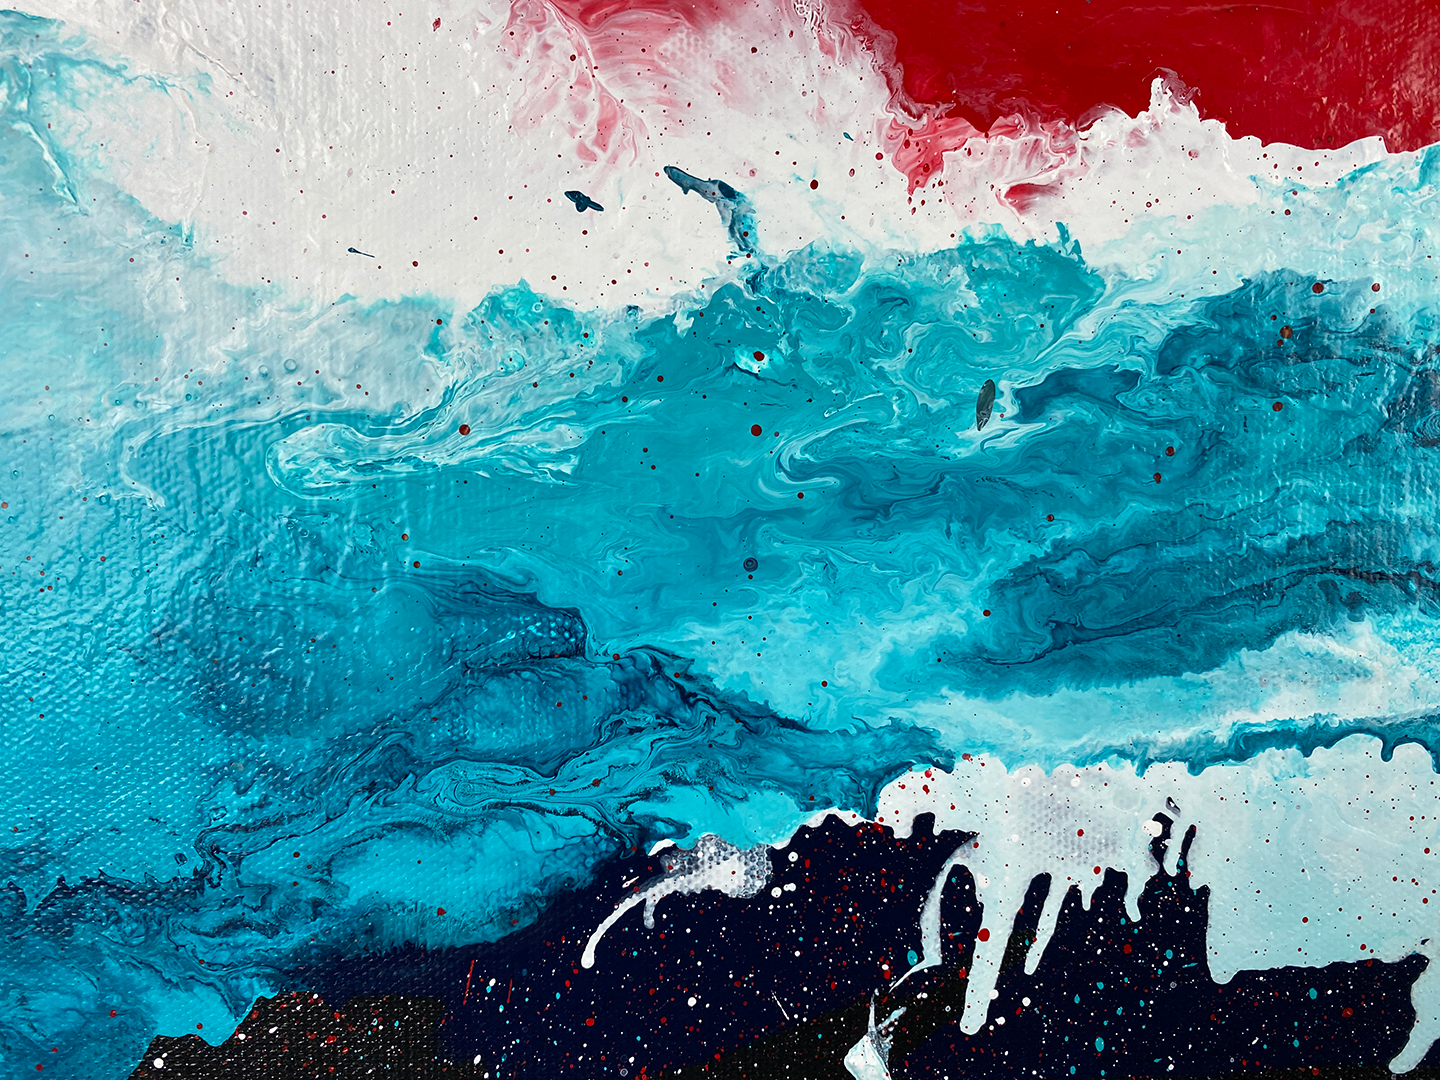 Abstract, expressionism, acrylic painting close-up 1. Volatile interactions of black, dark blue, turquoise, bright red and white